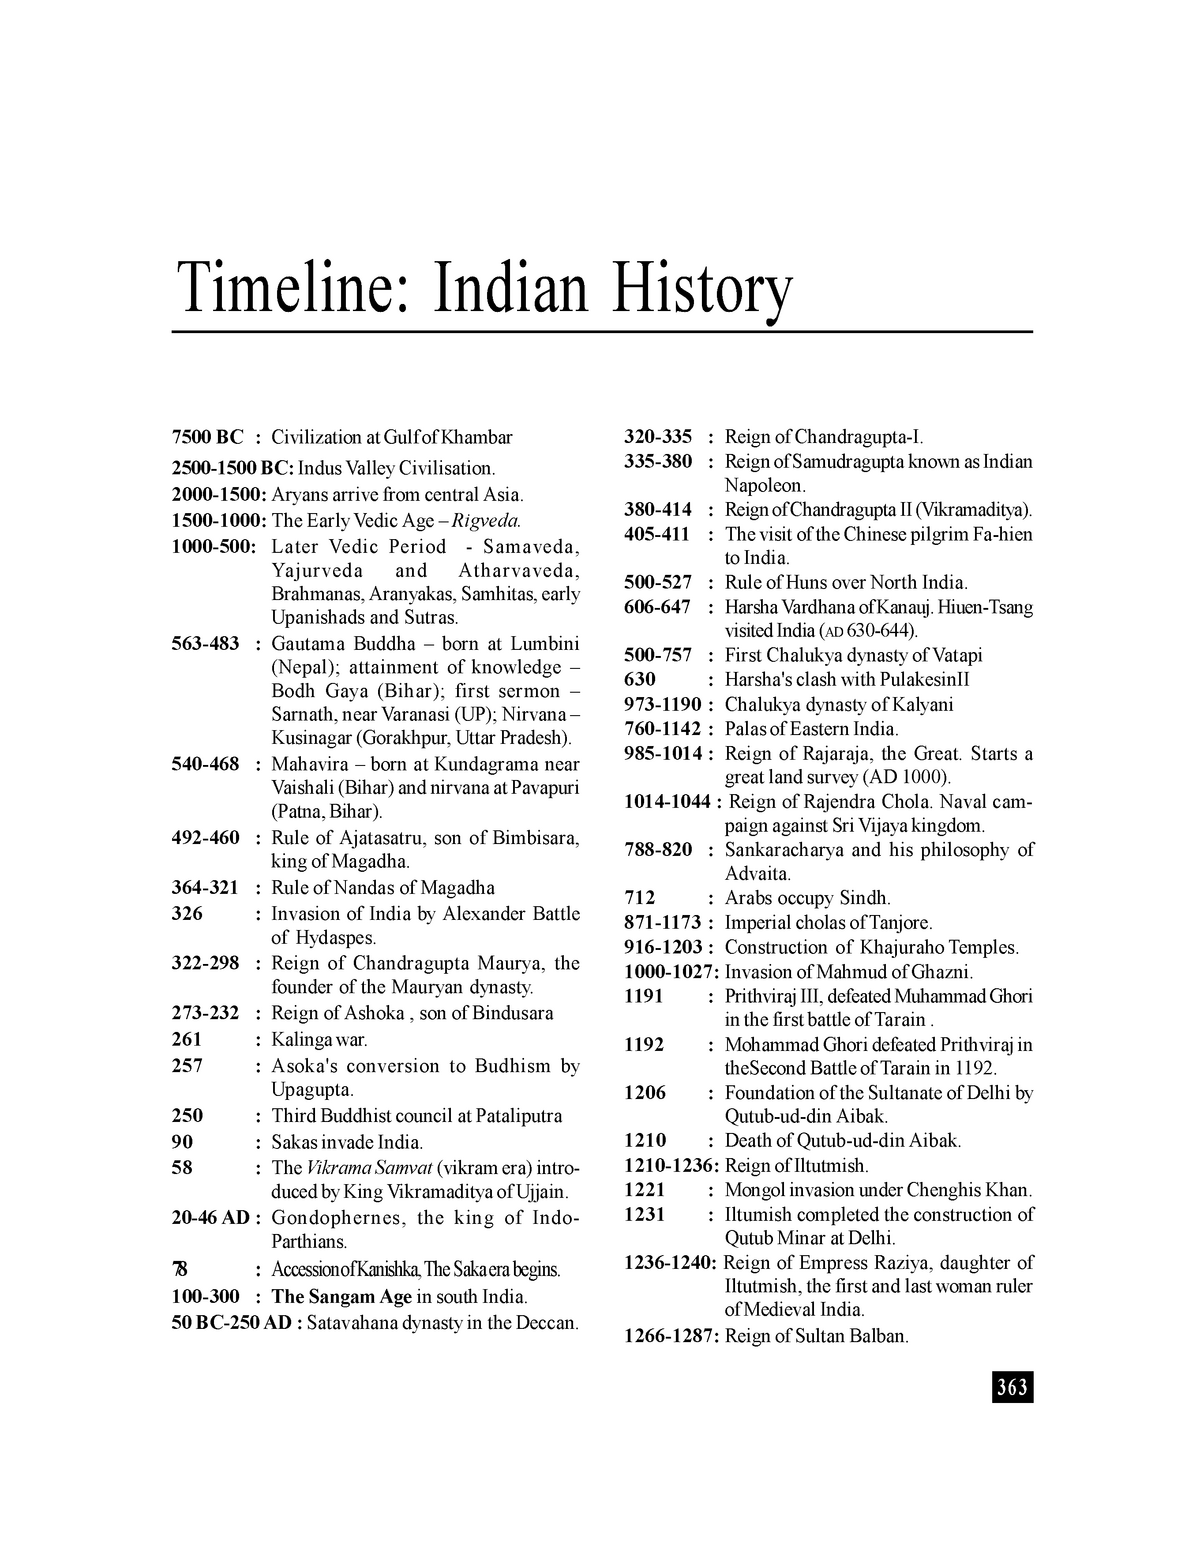 Timeline-indian-history - Thumb 1200 1553